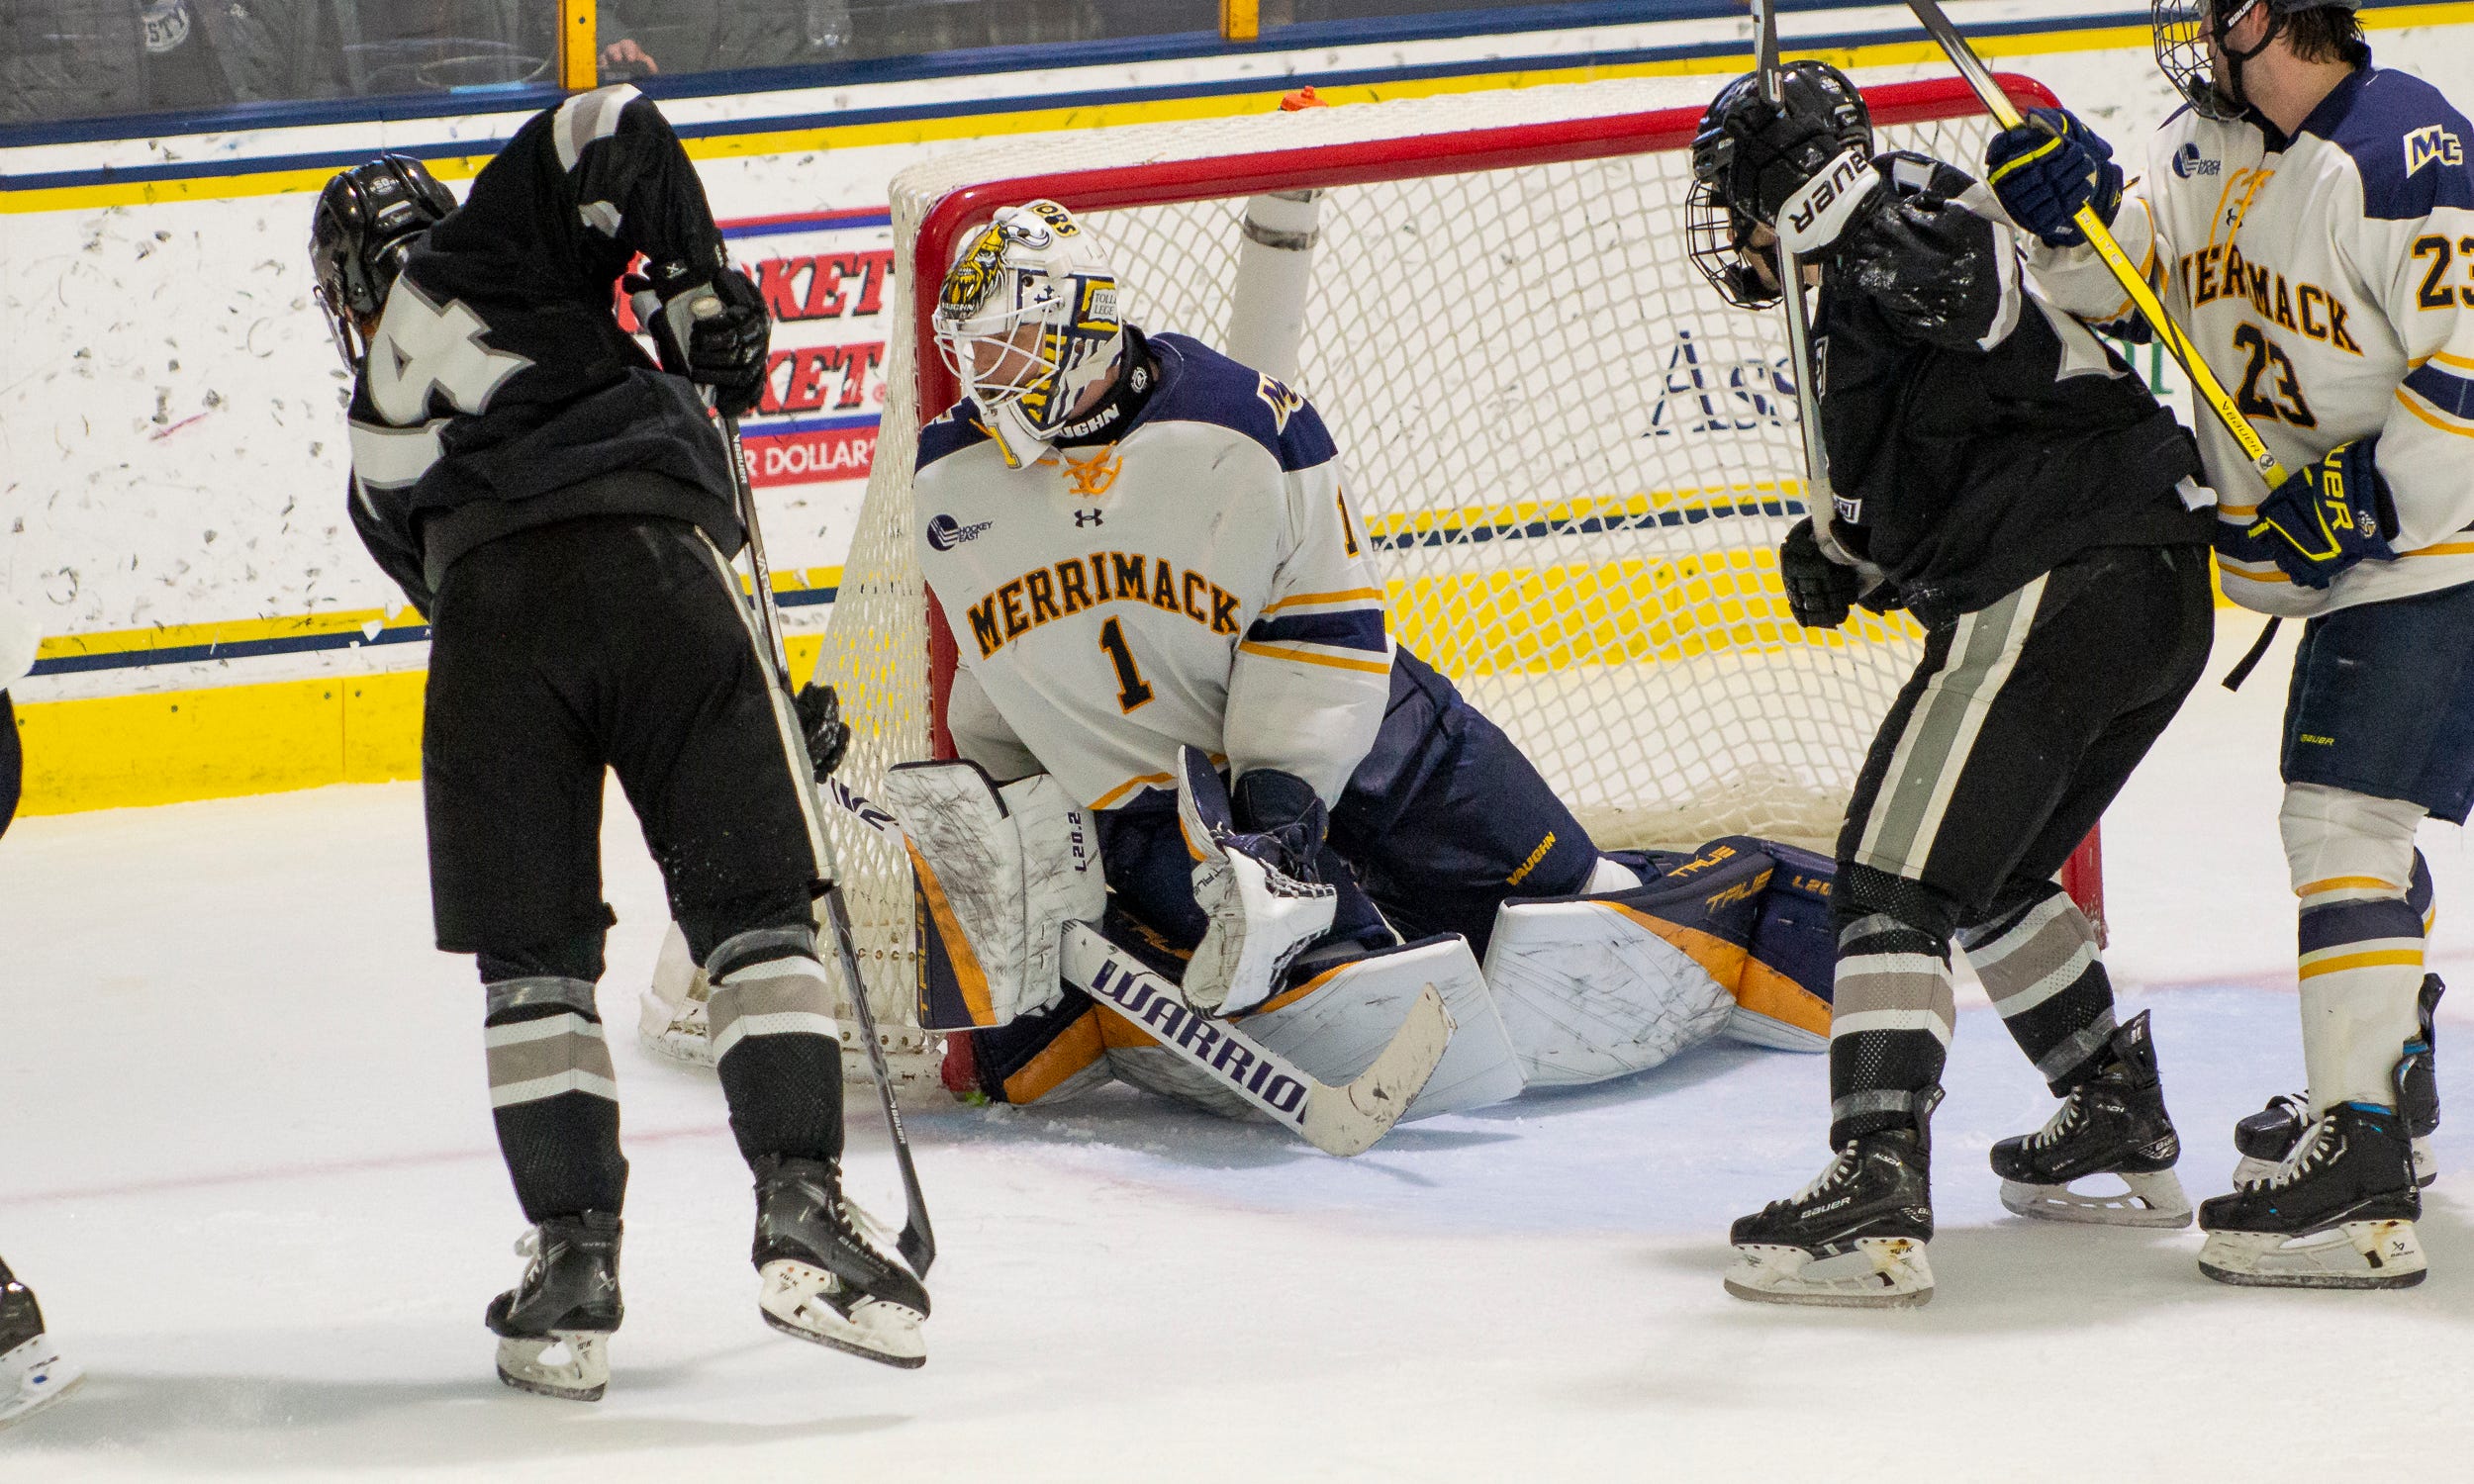 Ollas makes a career-high 46 saves in Merrimack's 2-1 win over Providence